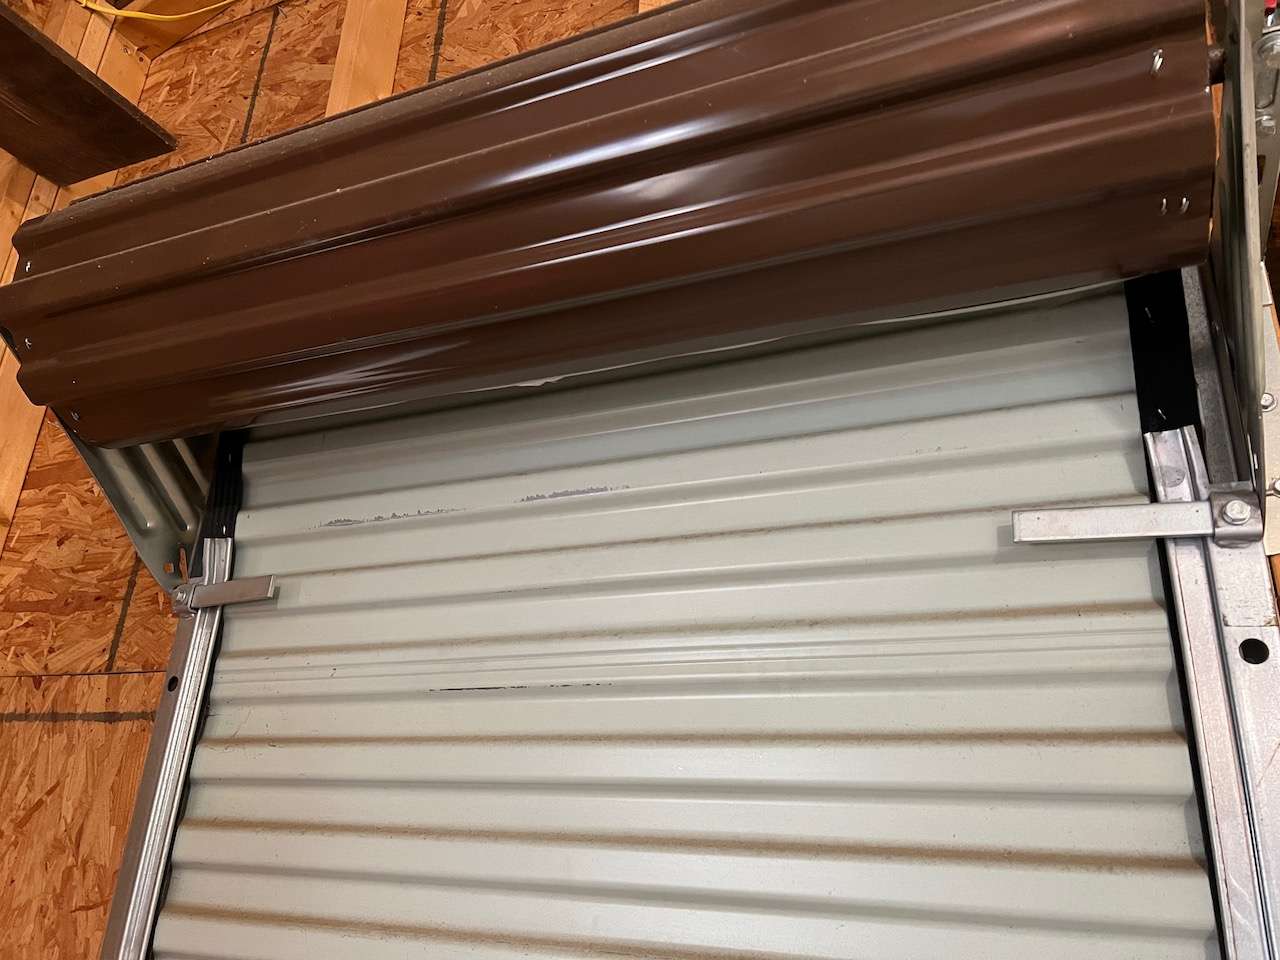 This roll-up door is not insulated, but the photo shows the type of garage door we are referring to.